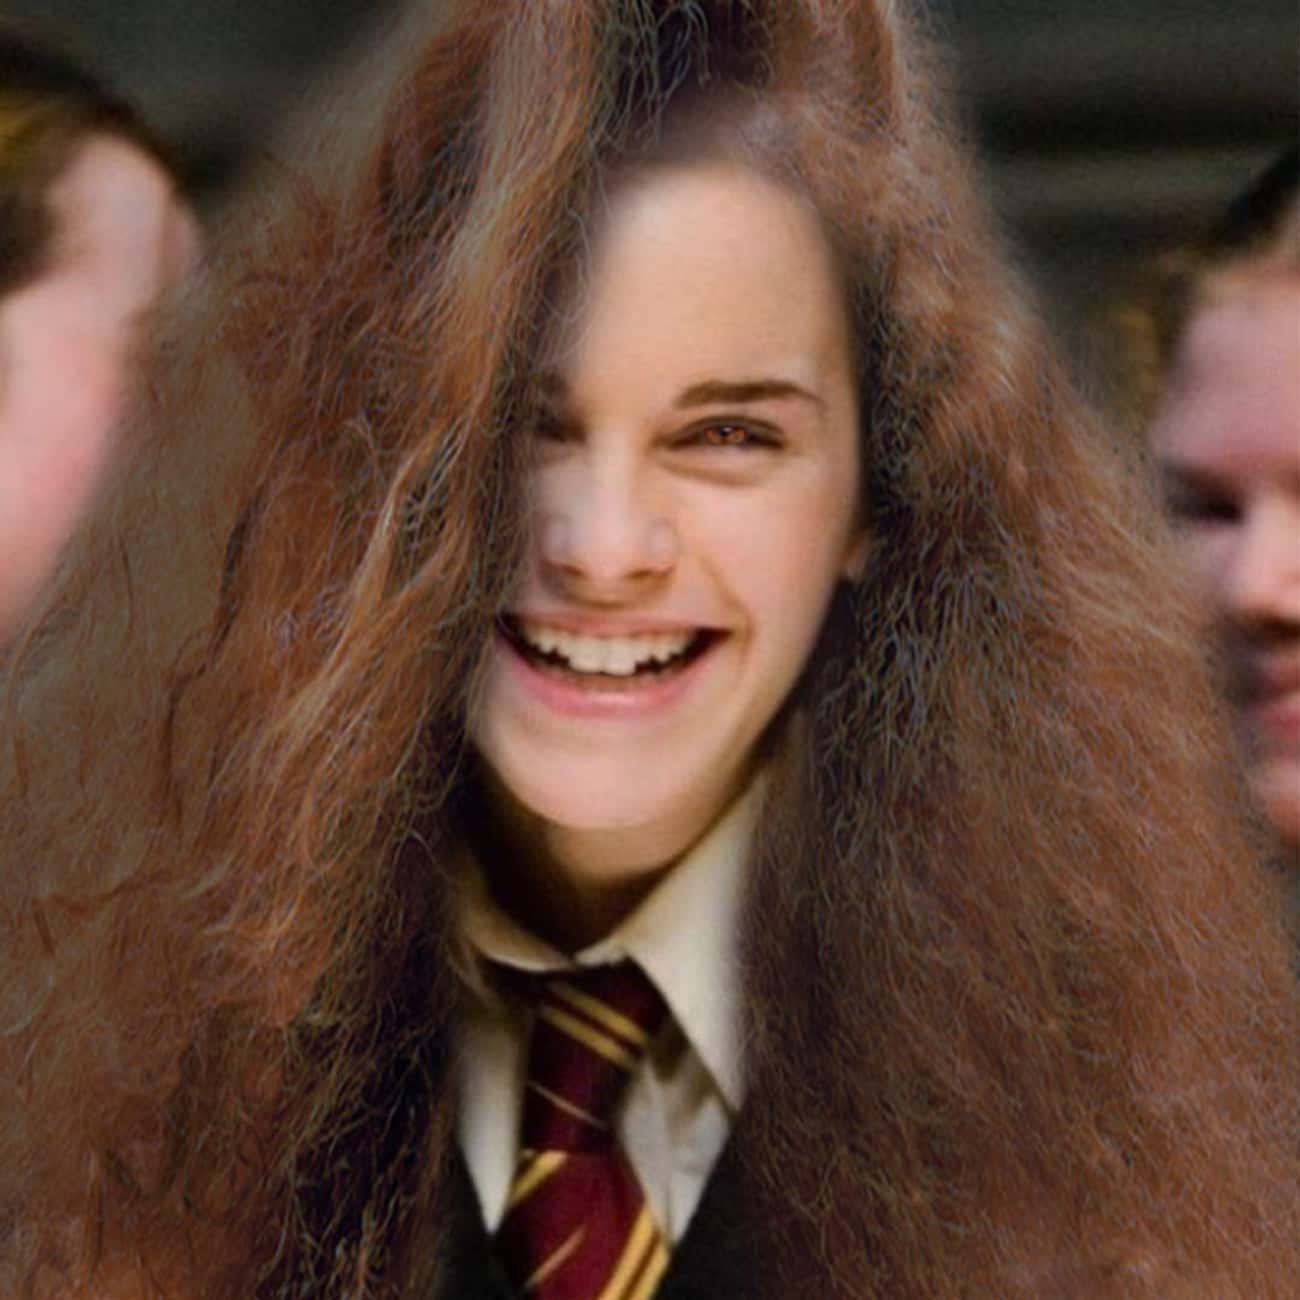 Hermione In The Books: Large Front Teeth, Bushy Hair